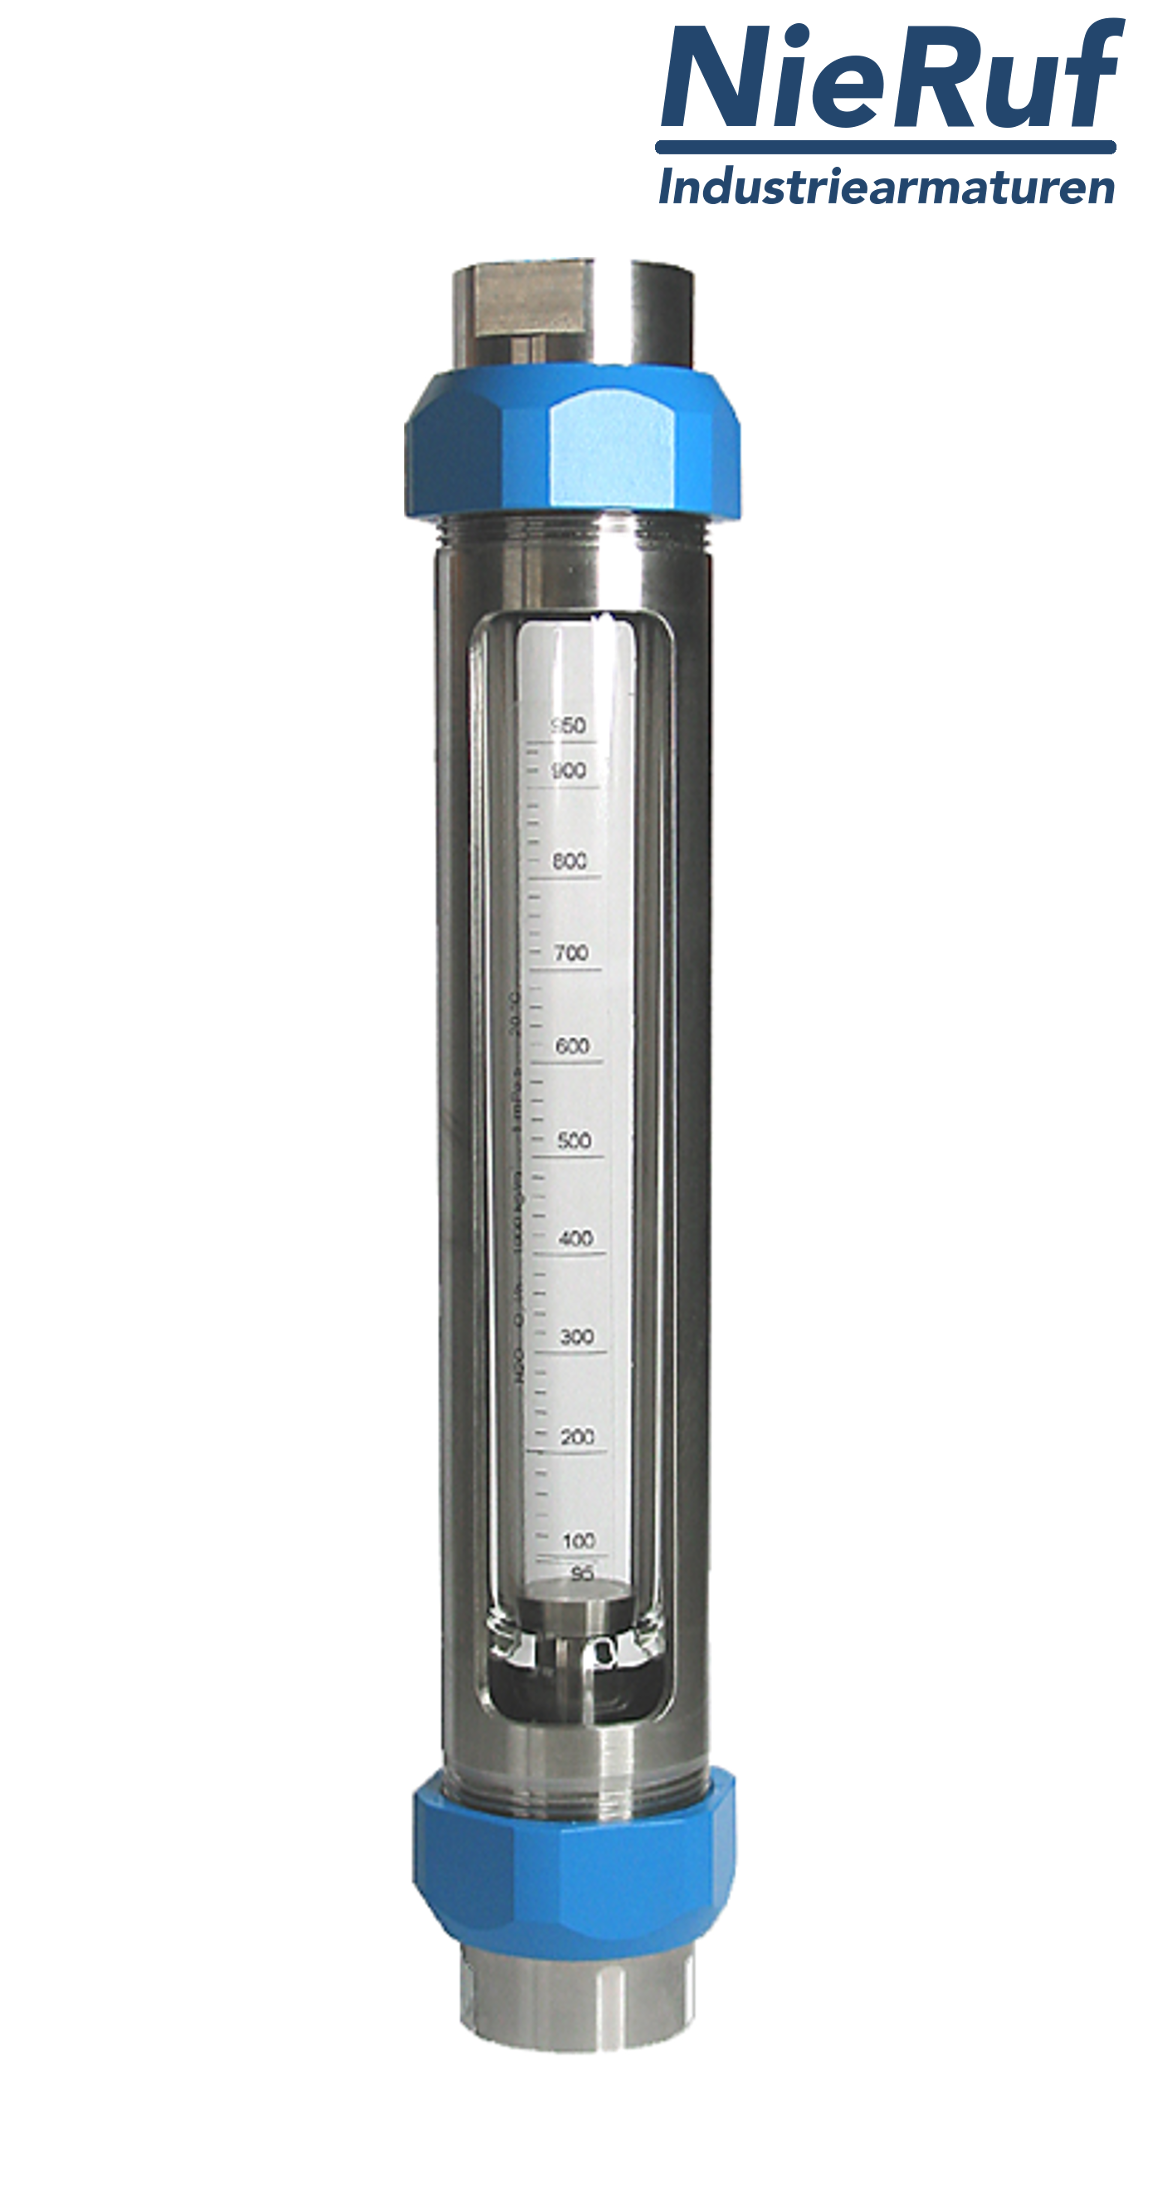 Variable area flowmeter stainless steel + borosilicate 1 1/4" inch 500.0 - 5000 l/h water FKM